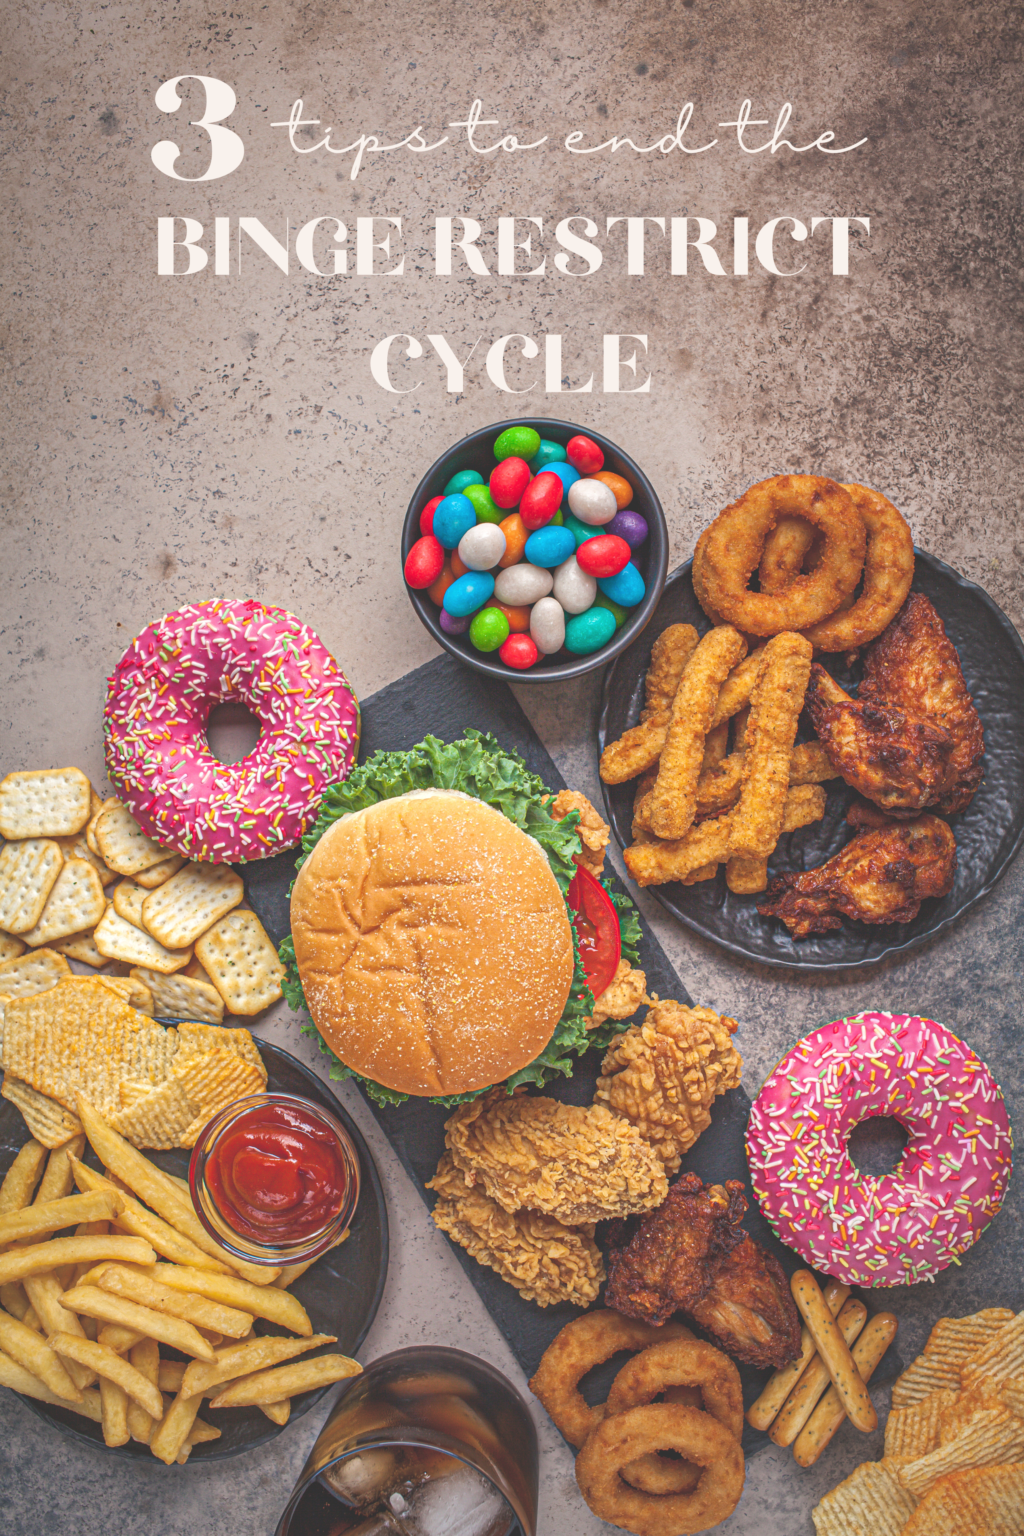 a photo of onion rings, donuts, burgers and fries with the text that says 3 tips to end the binge restrict cycle